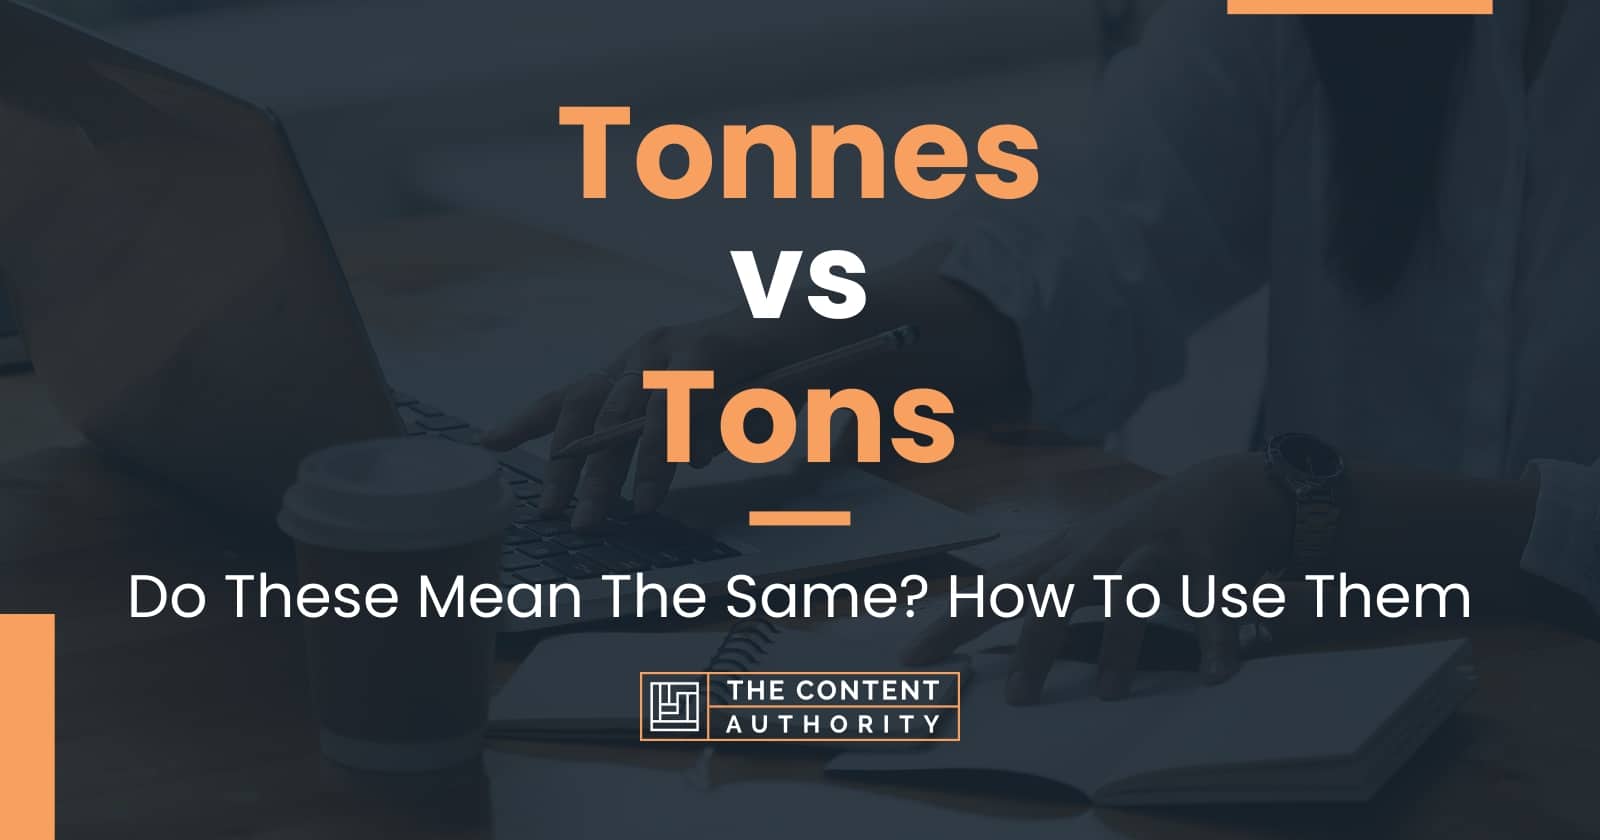 Tonnes vs Tons: Do These Mean The Same? How To Use Them